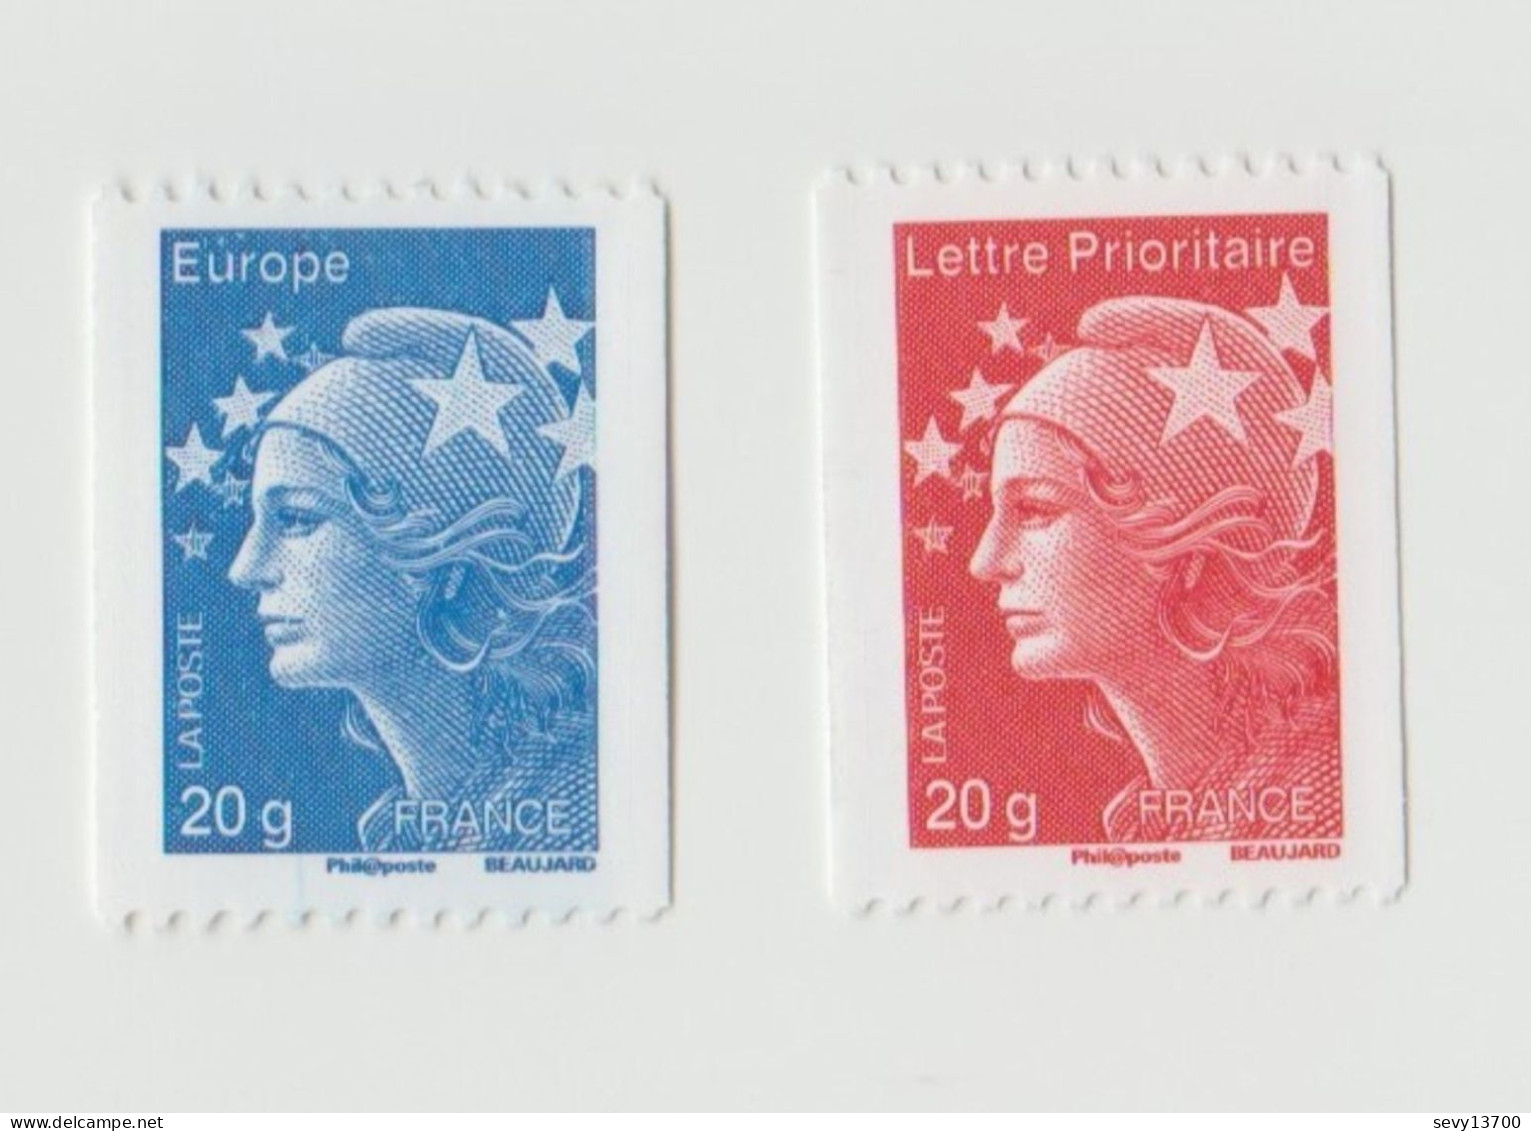 France Année 2009 - 2 Timbres Roulette Marianne De Beaujard Neuf Yvert Tellier 4573 Et 4572 - 2008-2013 Marianne (Beaujard)